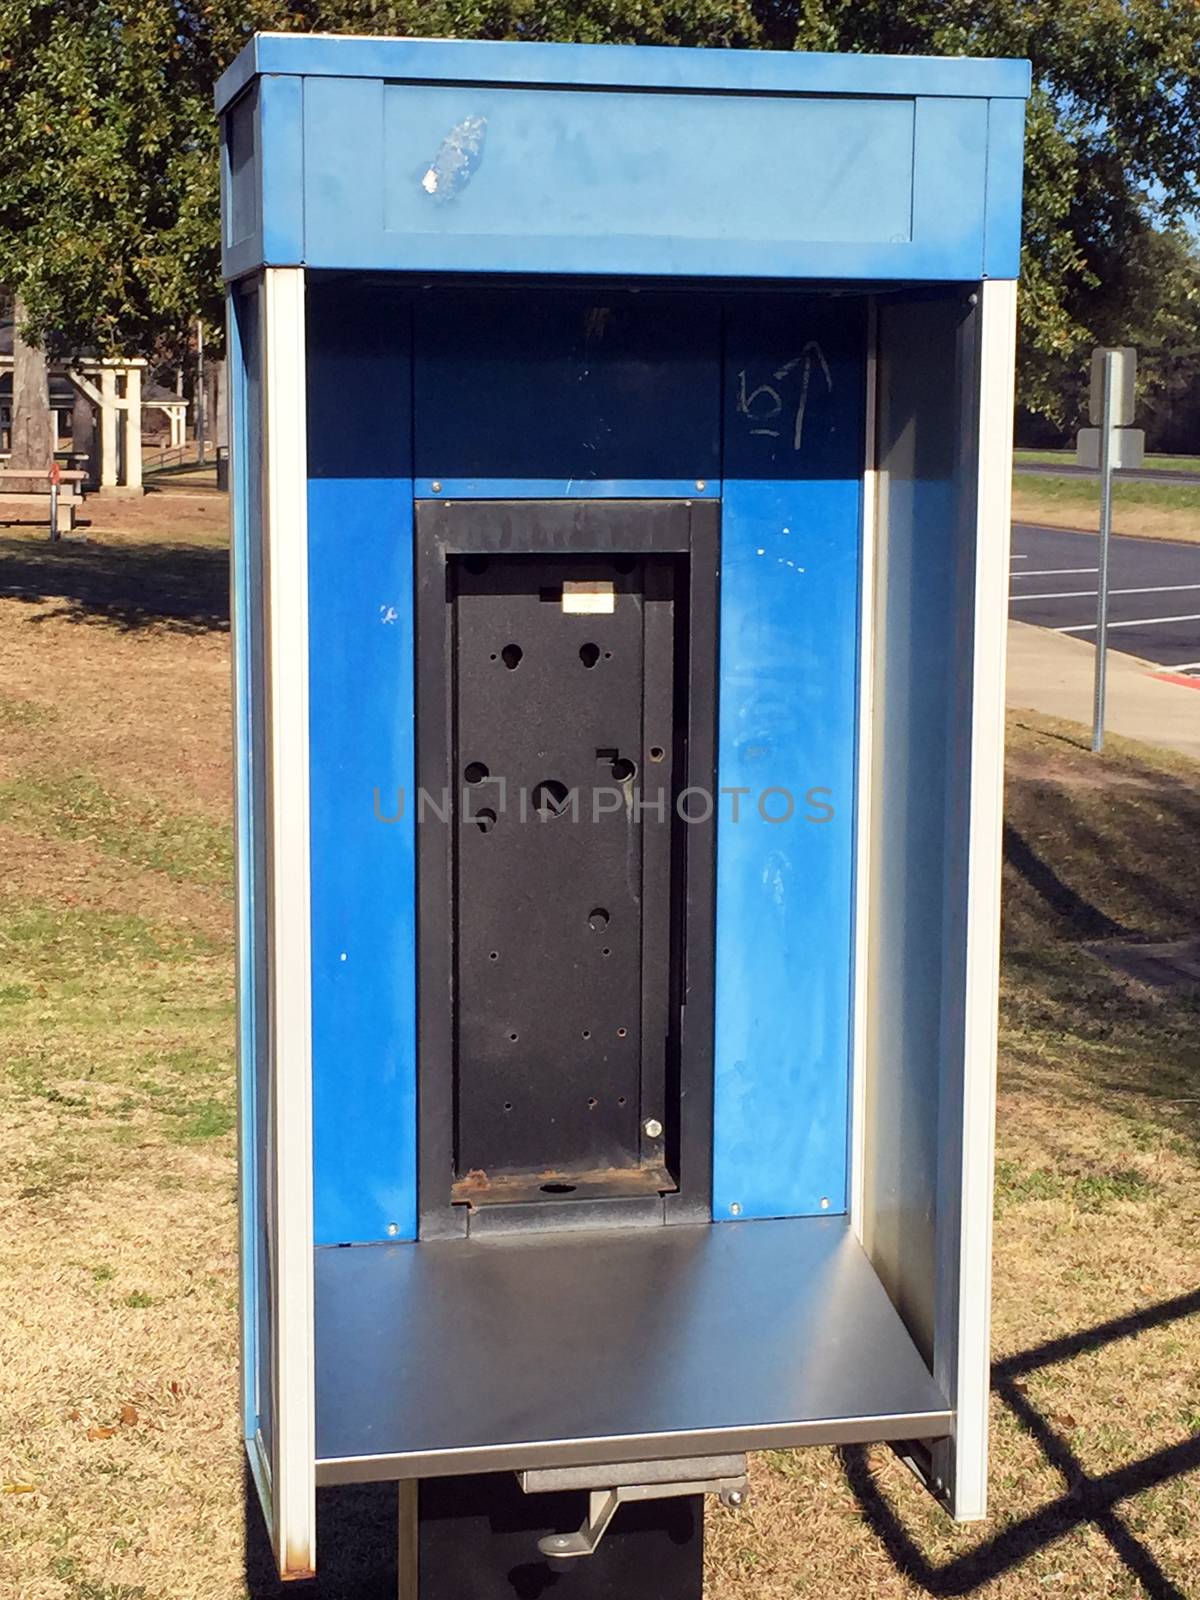 Abandoned public telephone booth.  Pay phones are increasingly being removed due to their low usage, having been replaced by cell phones.